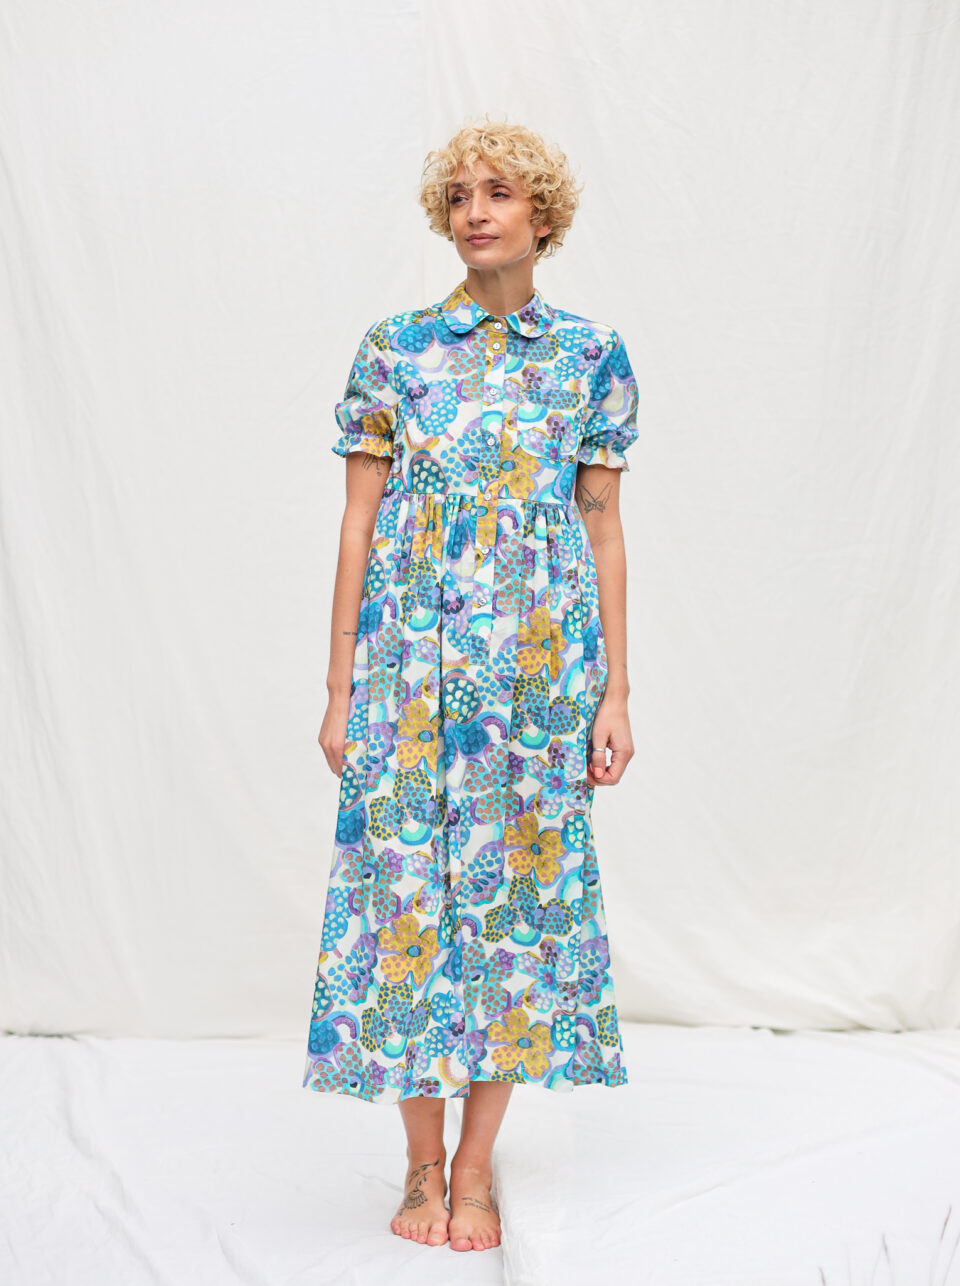 Peter Pan collar ruffled sleeves dress in FAUVISIM FLORAL blue print | Dress | Sustainable clothing | OffOn clothing